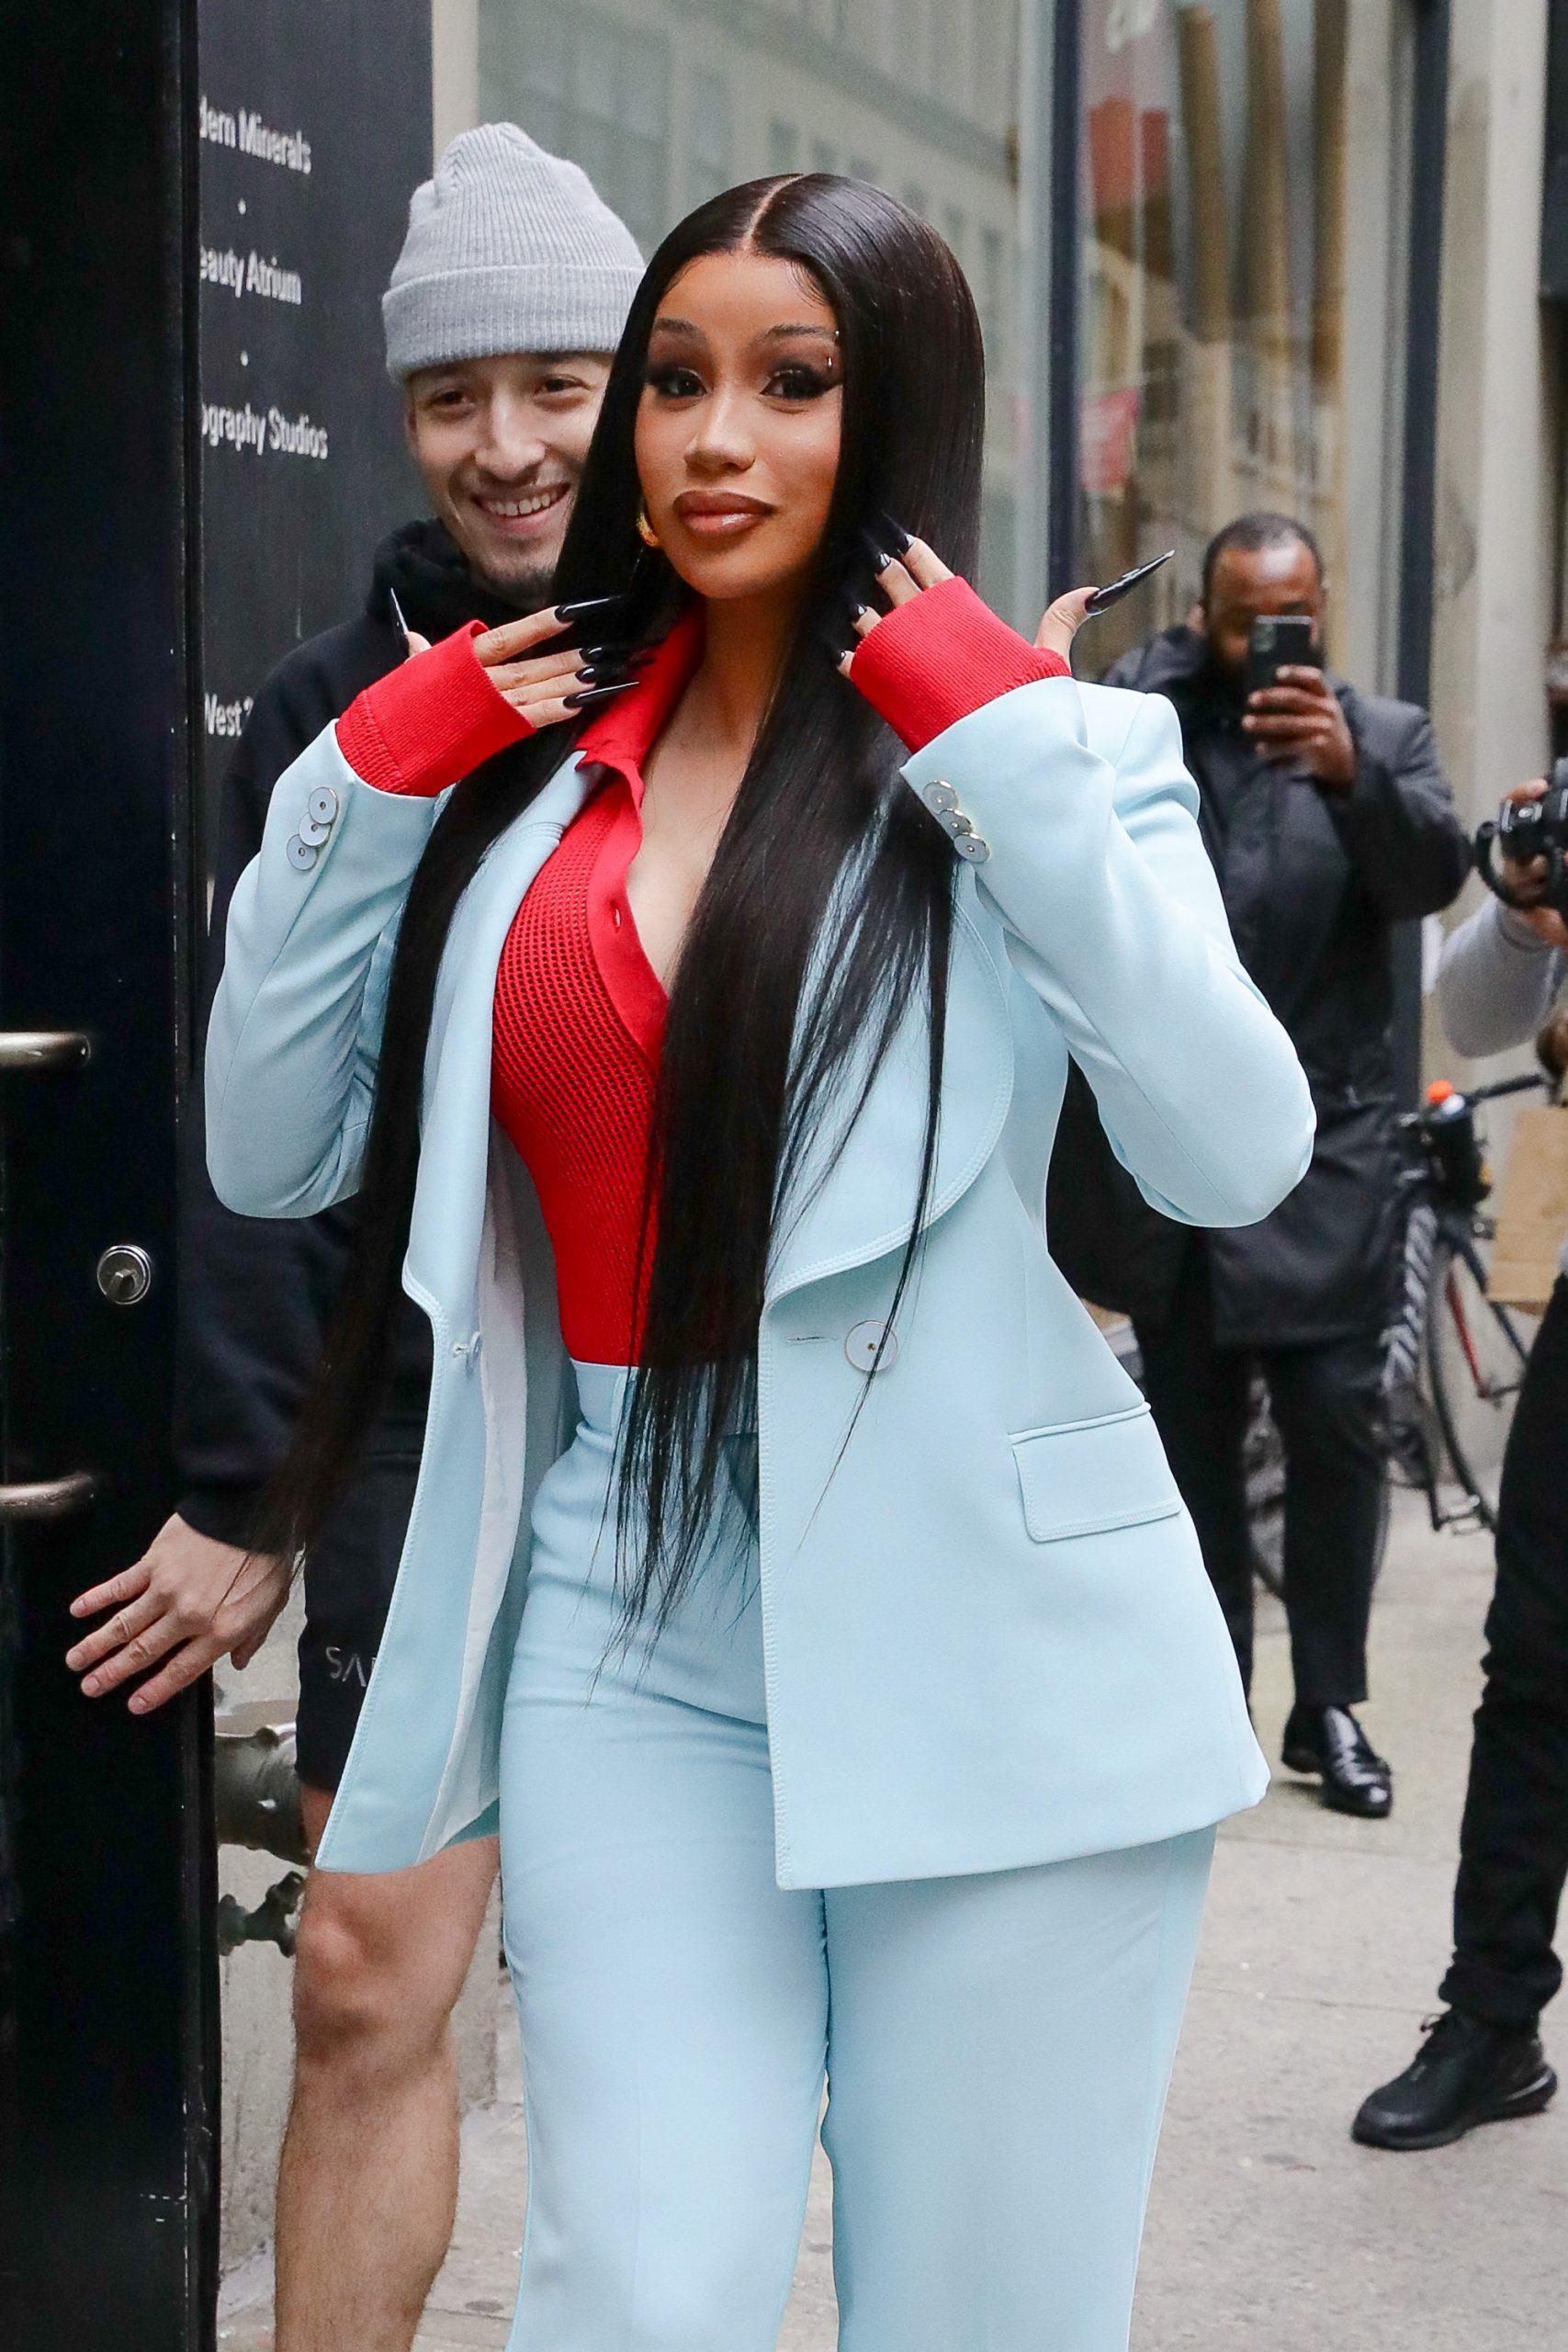 Cardi B looks looks radiant in a light blue suit as arriving at an office building in NYC